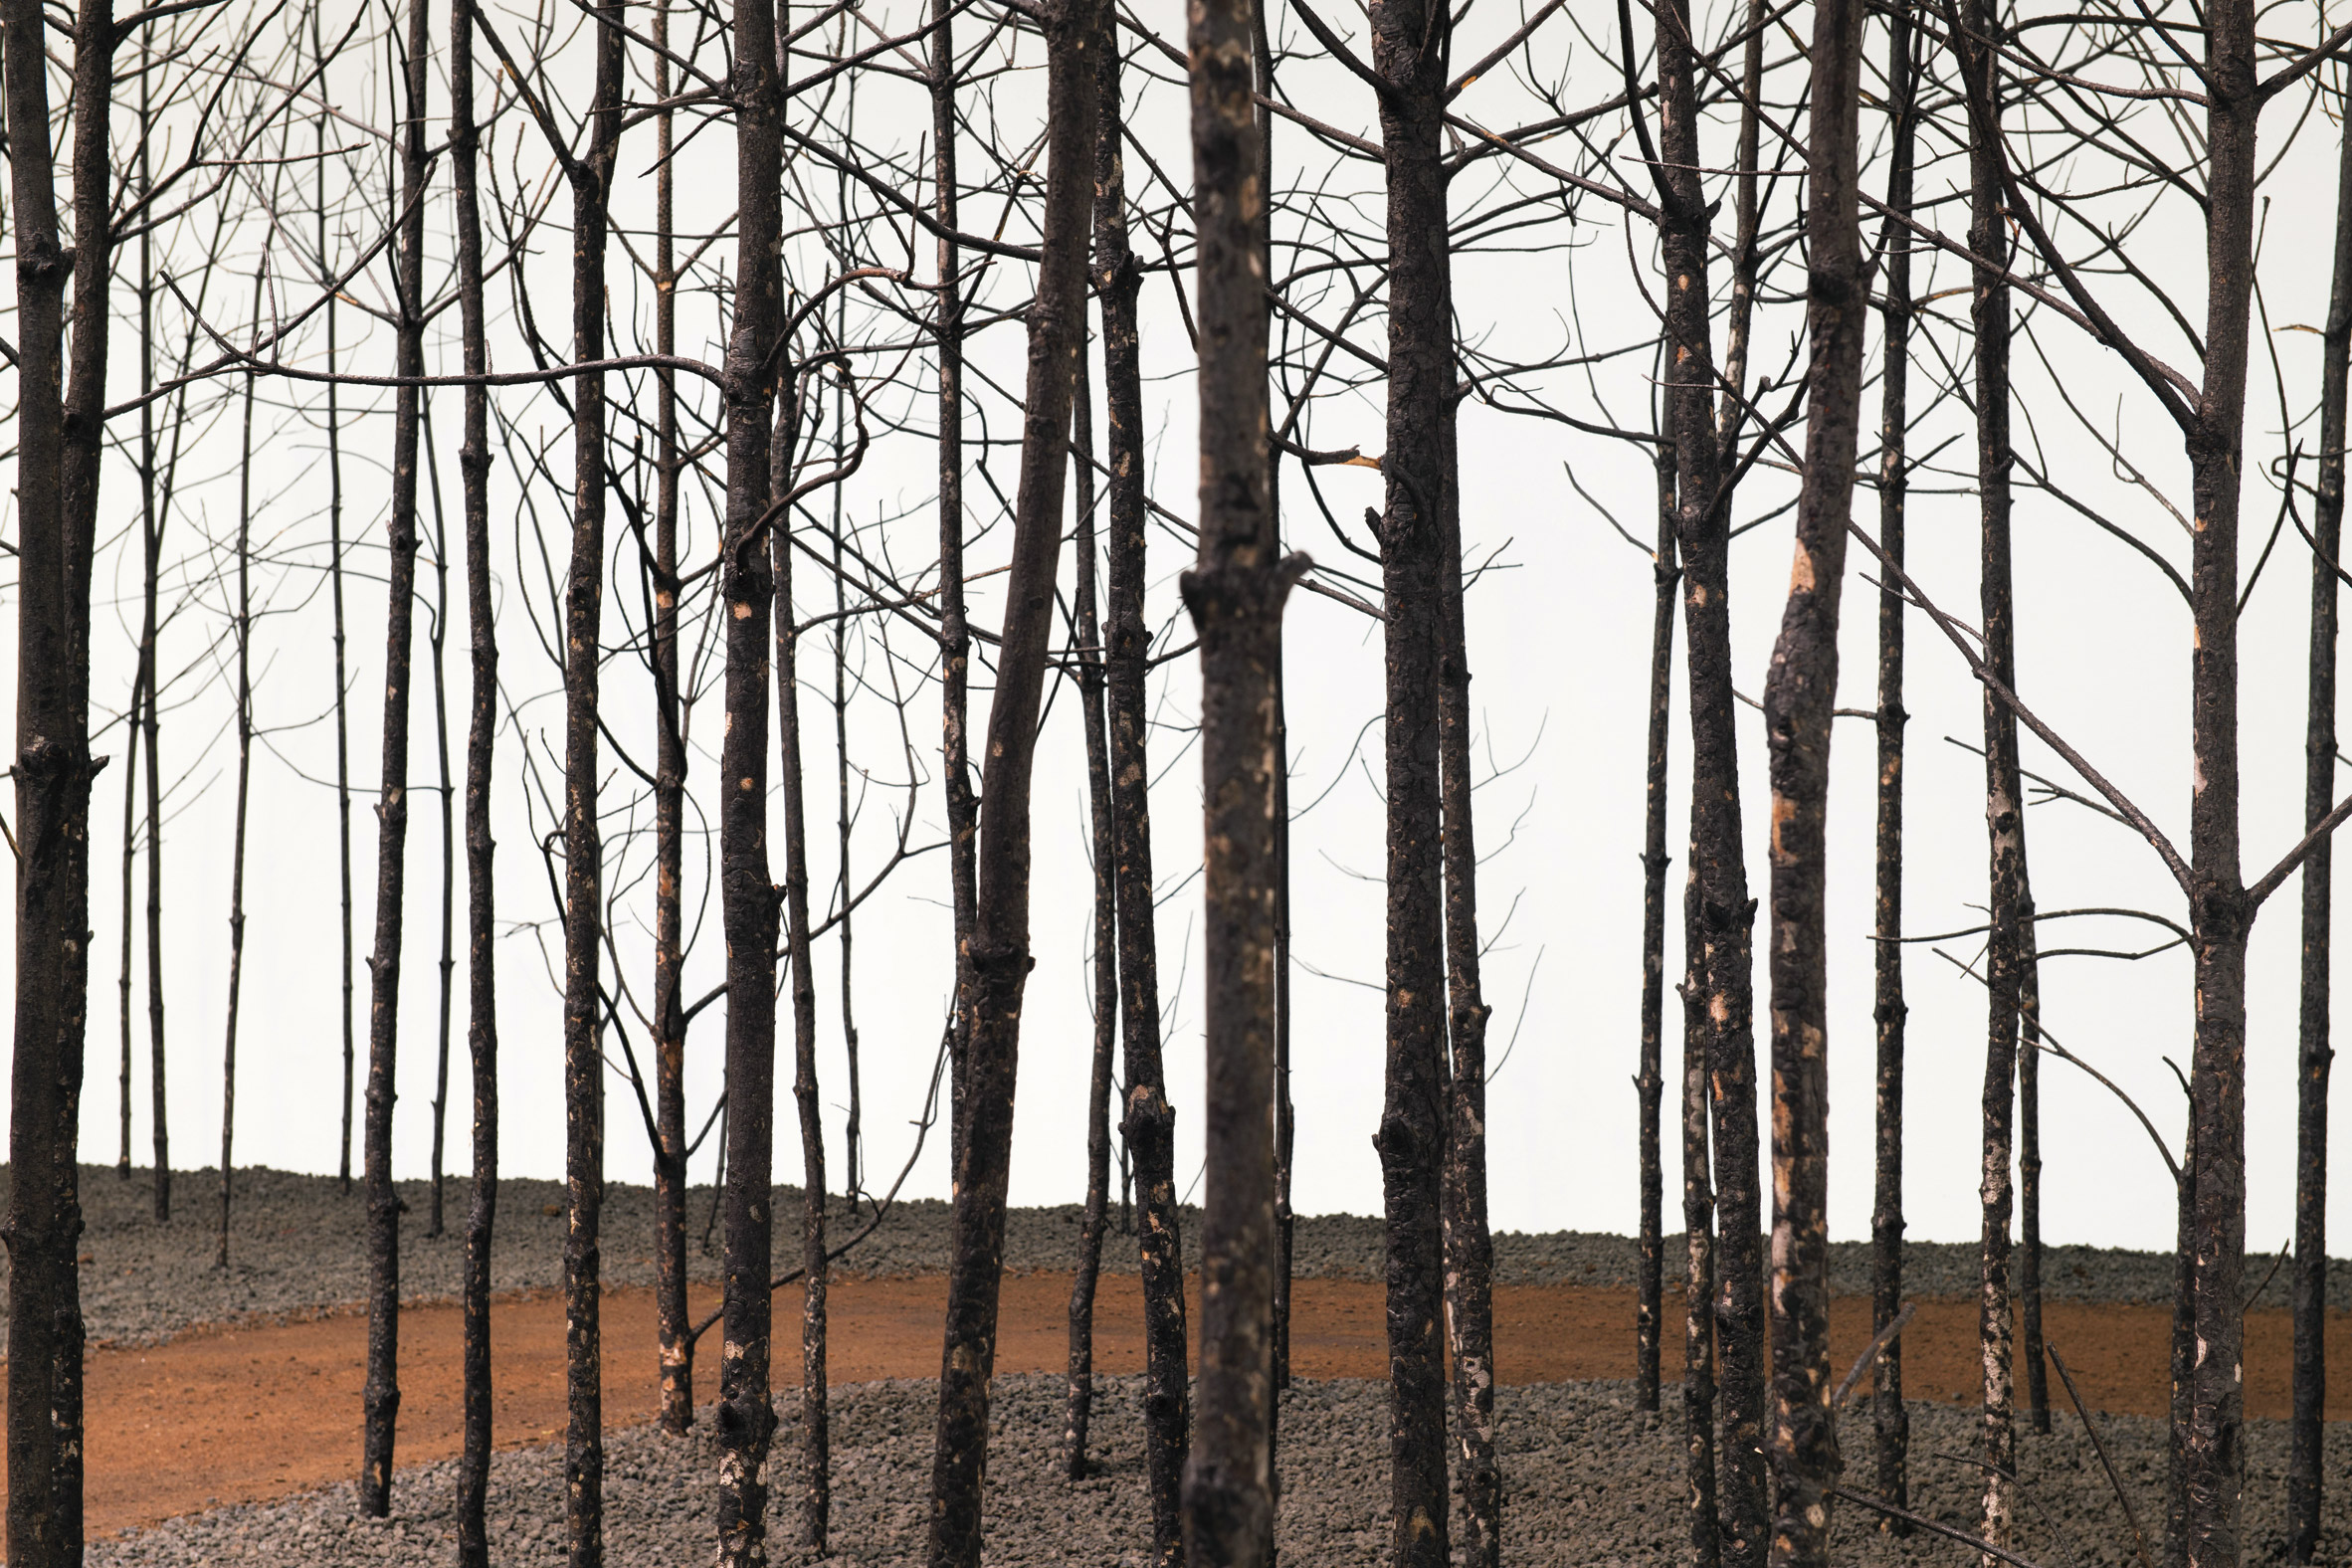 Blackened dead pine trees in installation by Superflux